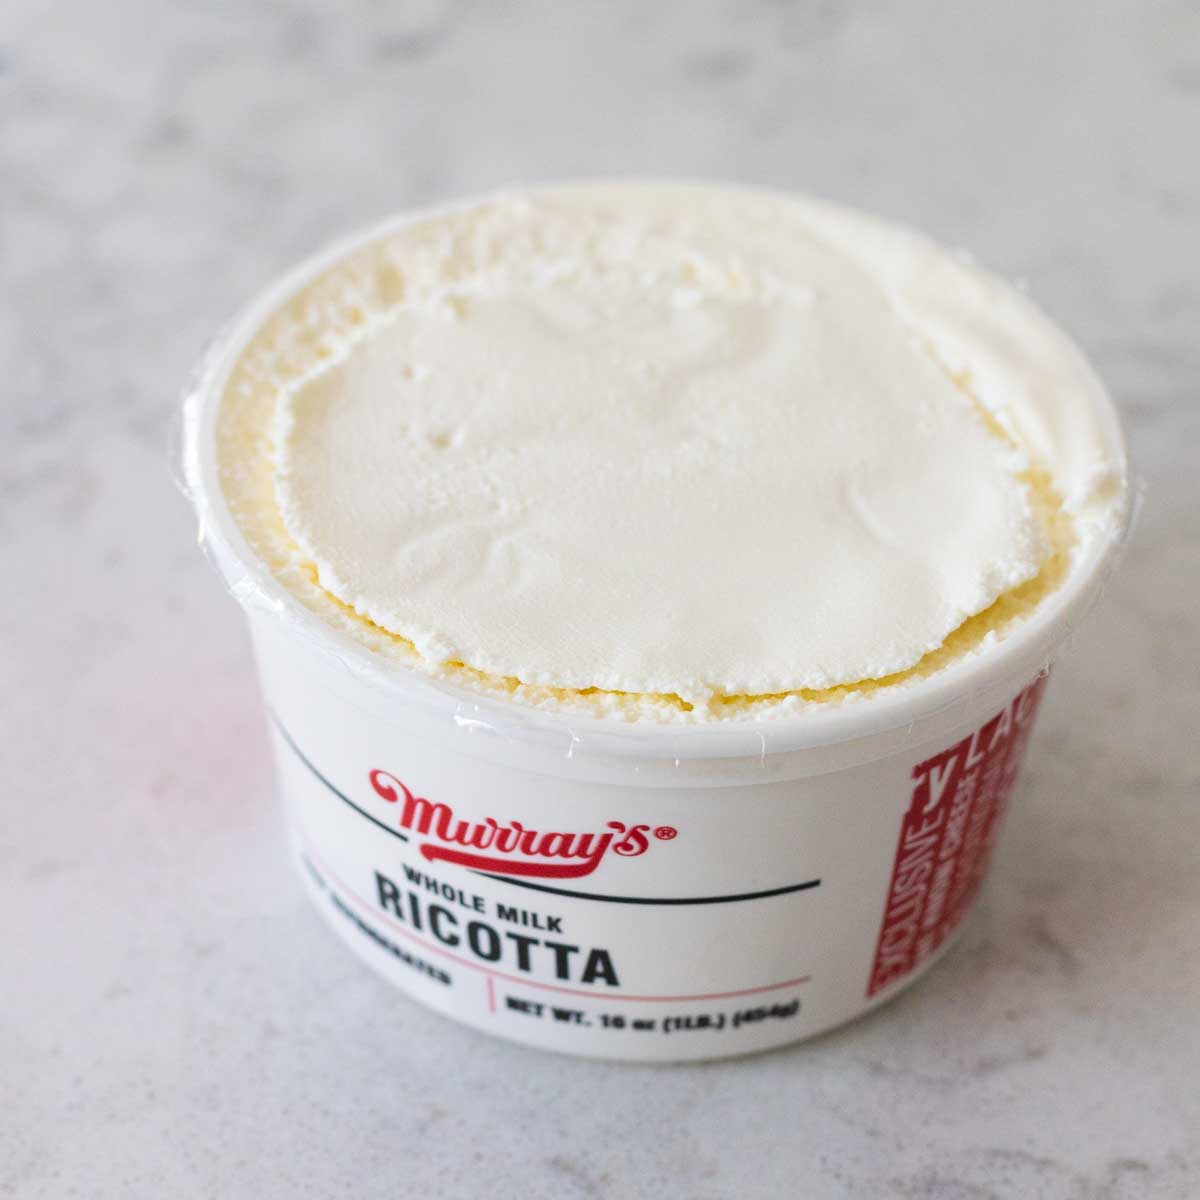 A close up look at the container of ricotta cheese shows the texture of the ingredient.